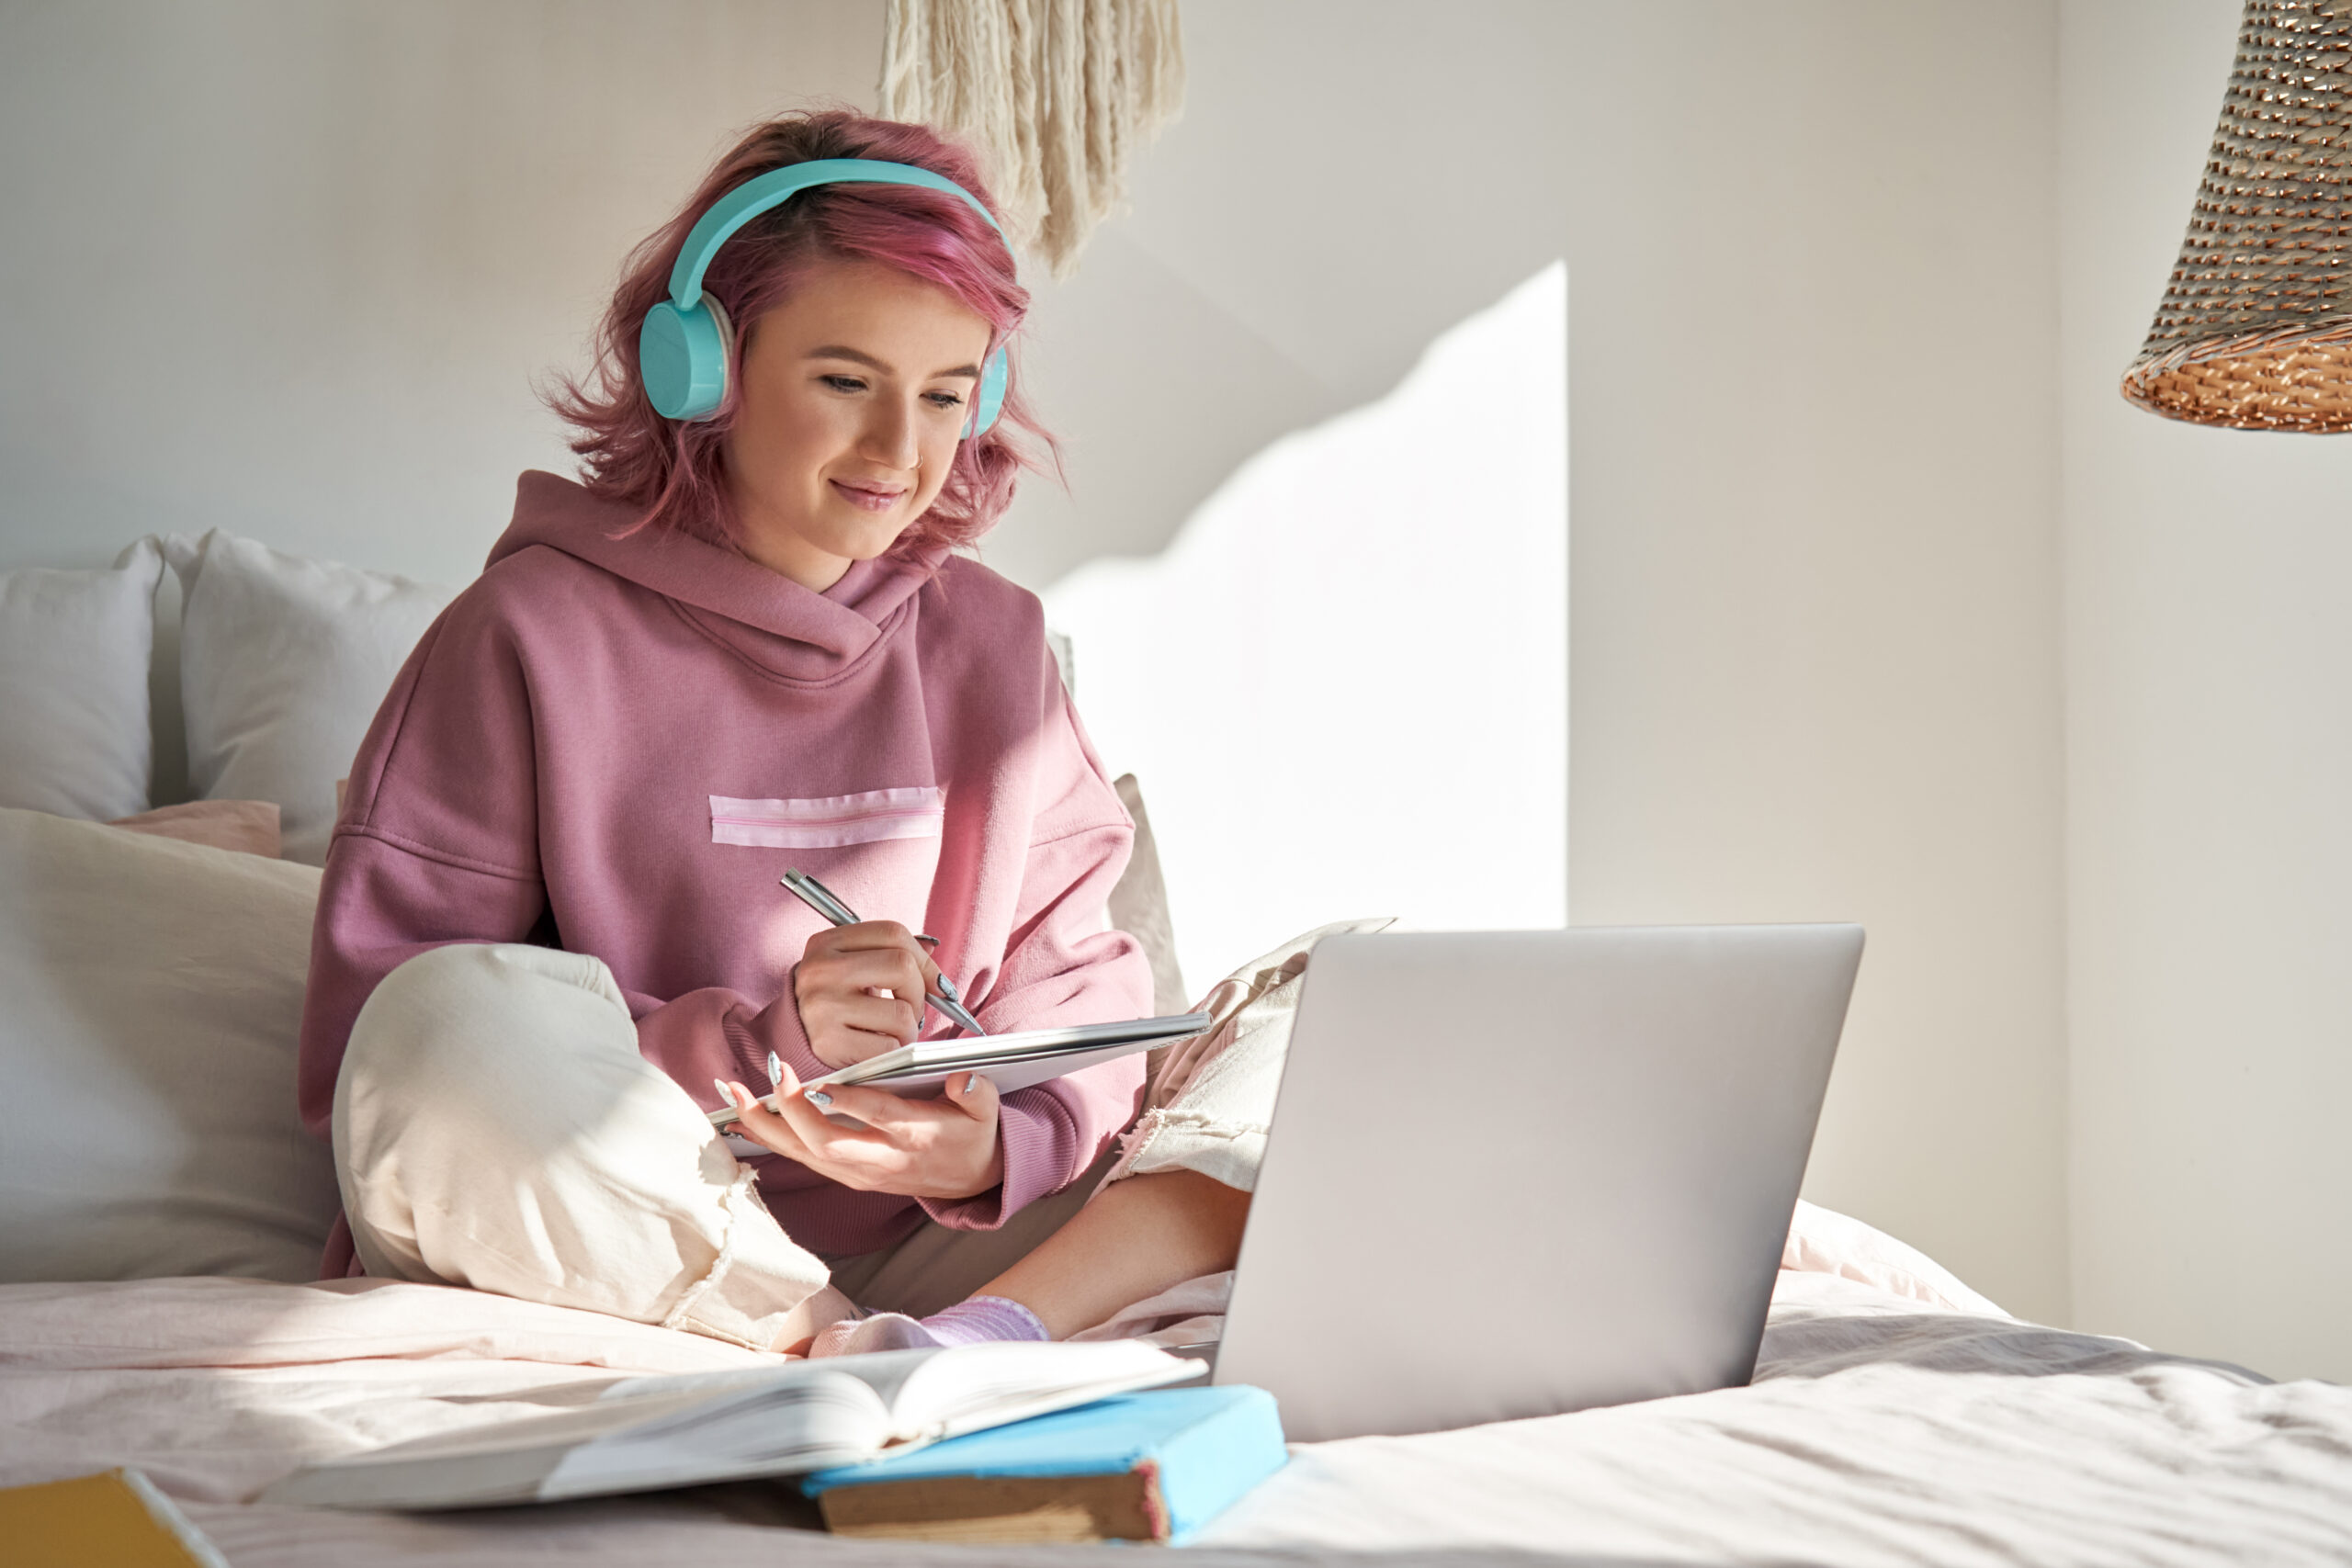 Girl studying on bed with earphones